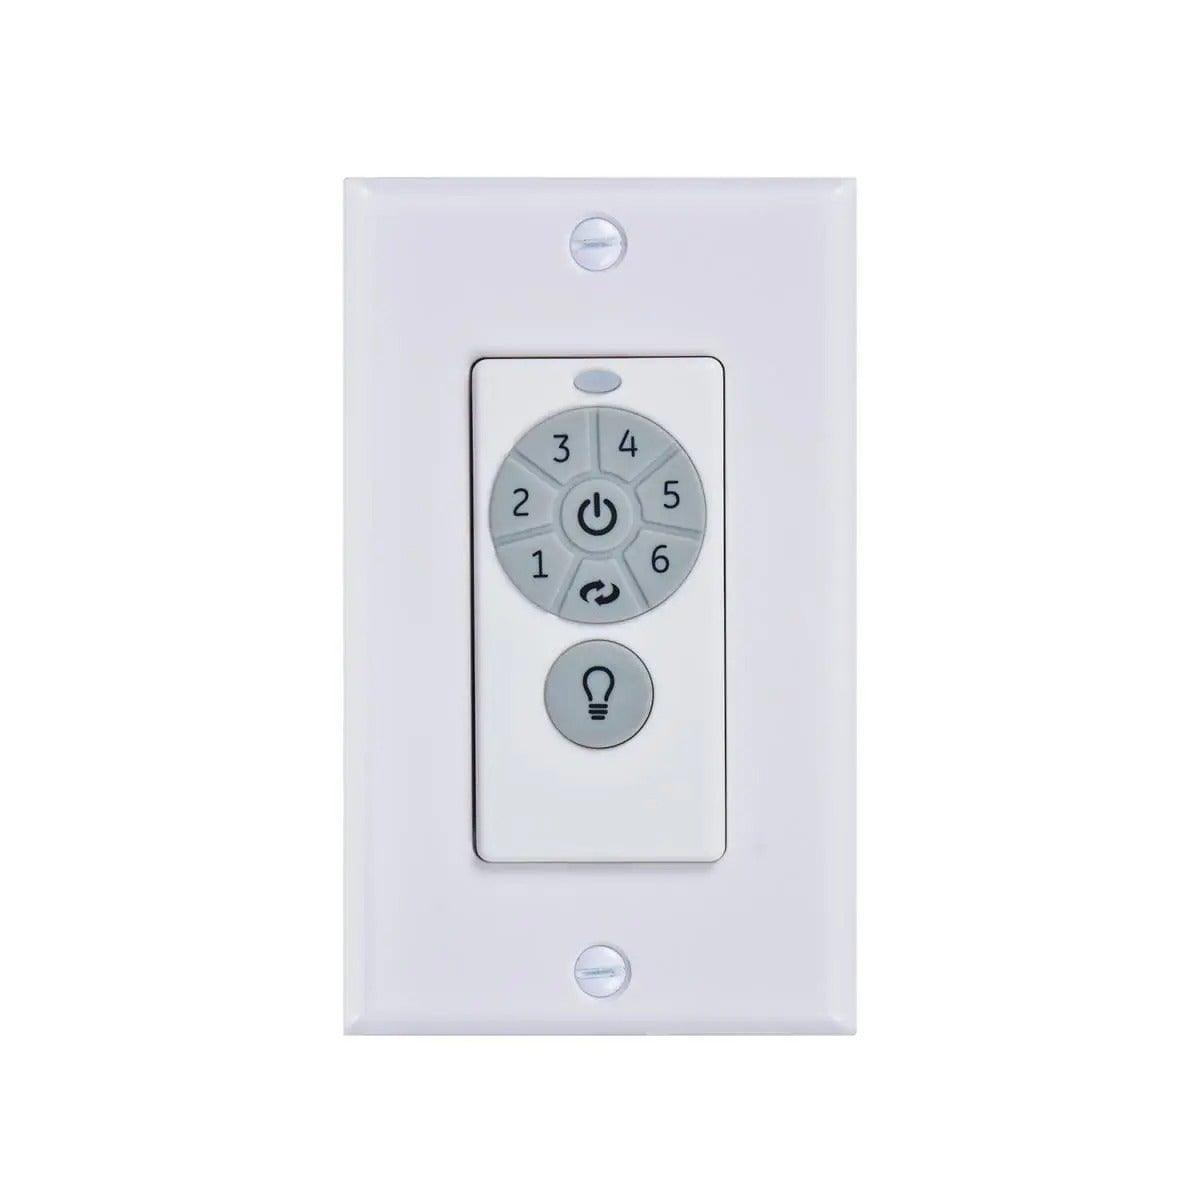 Ceiling Fan Wall Control with LED dimmer - LV LIGHTING